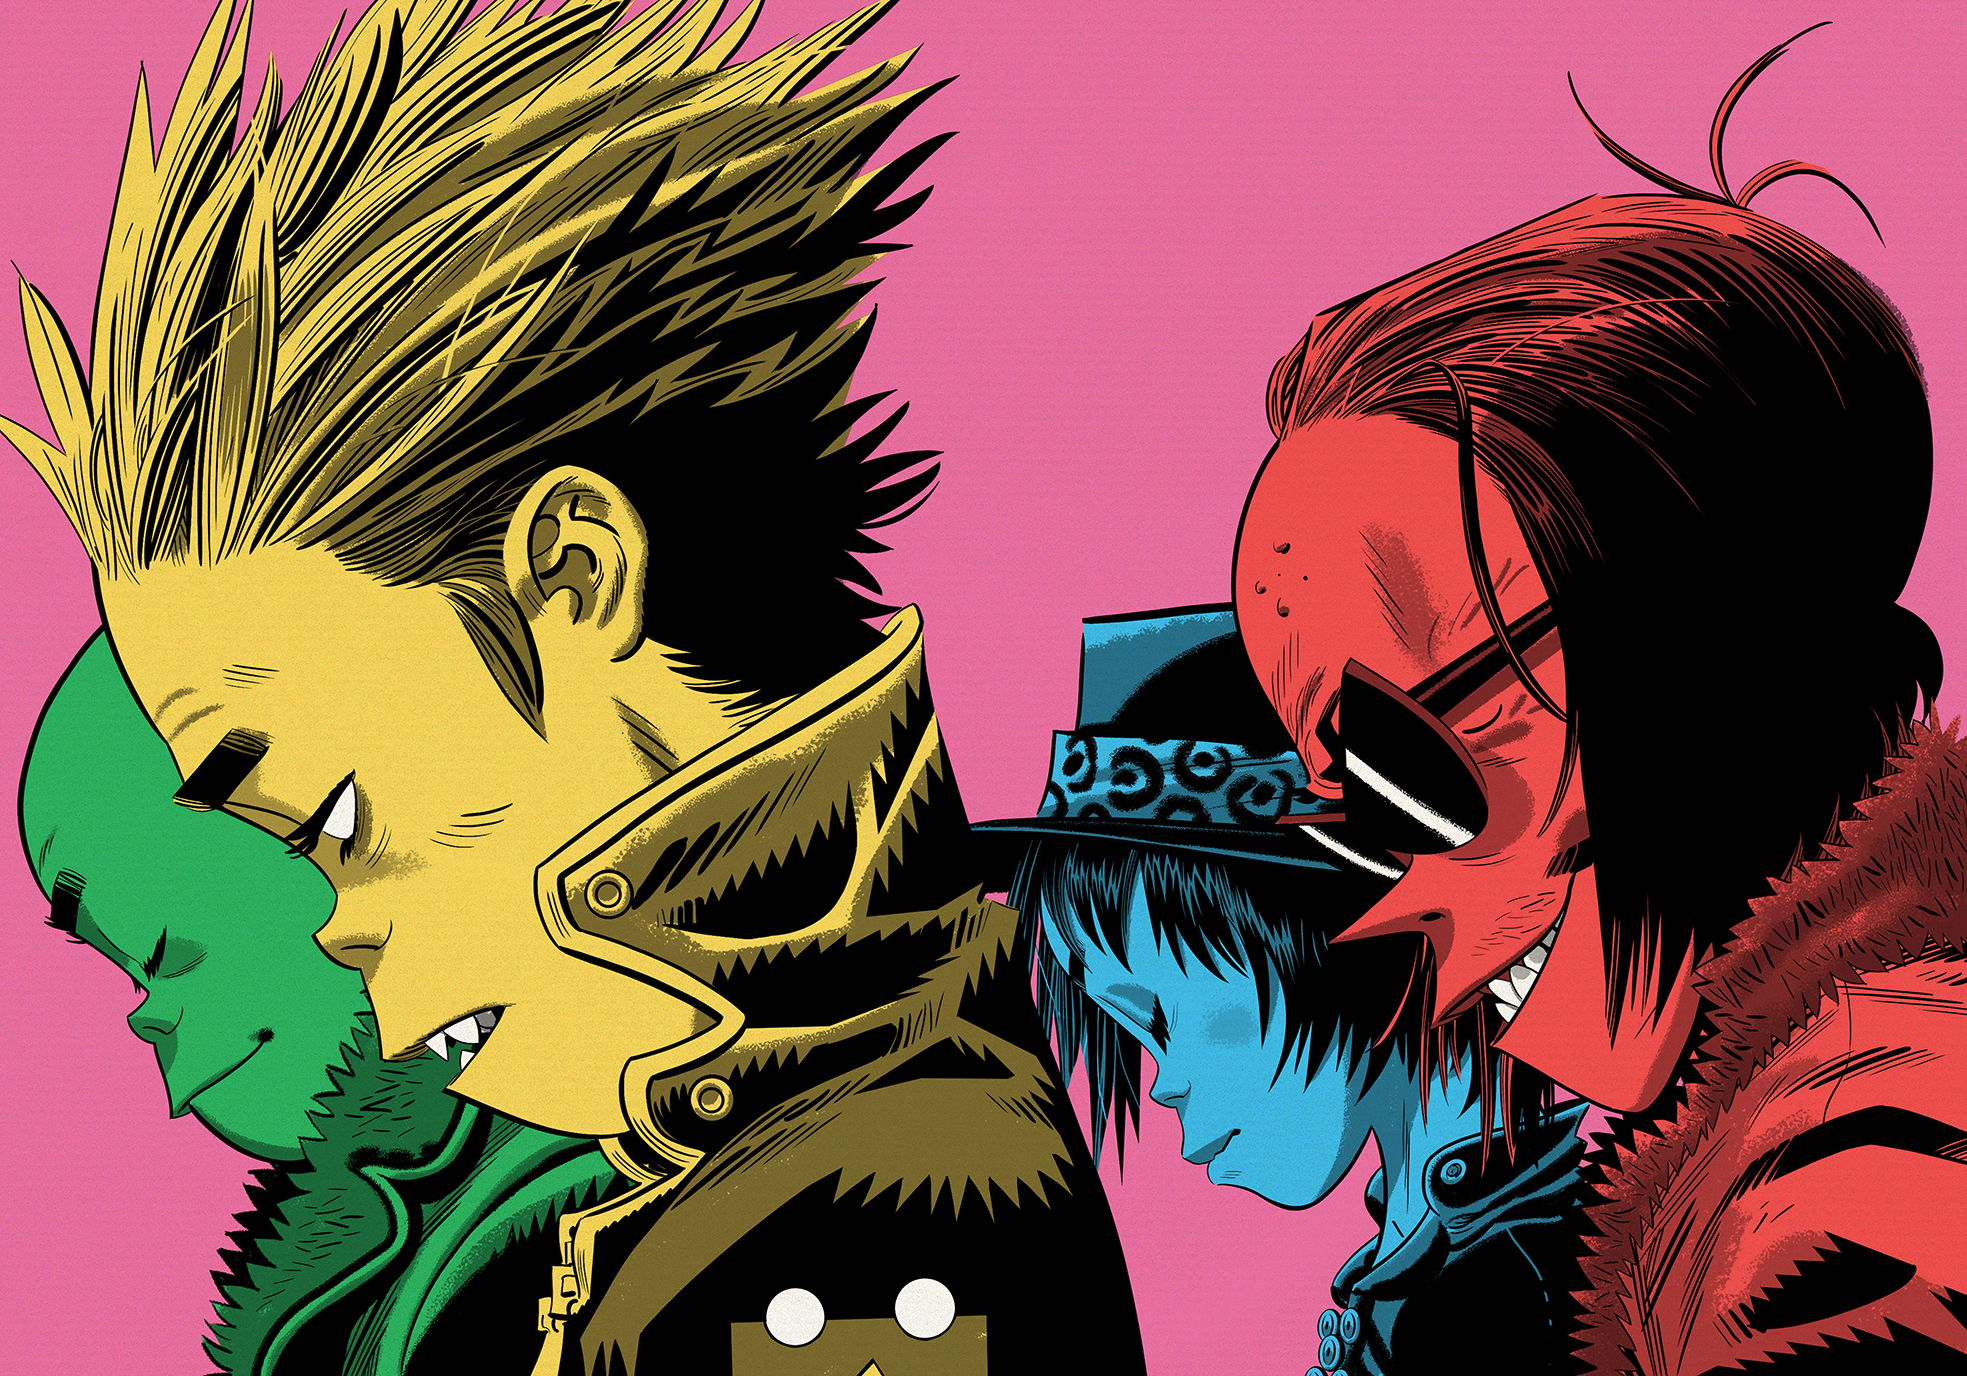 Gorillaz’ Noodle is fighting for the future of the band as we know it